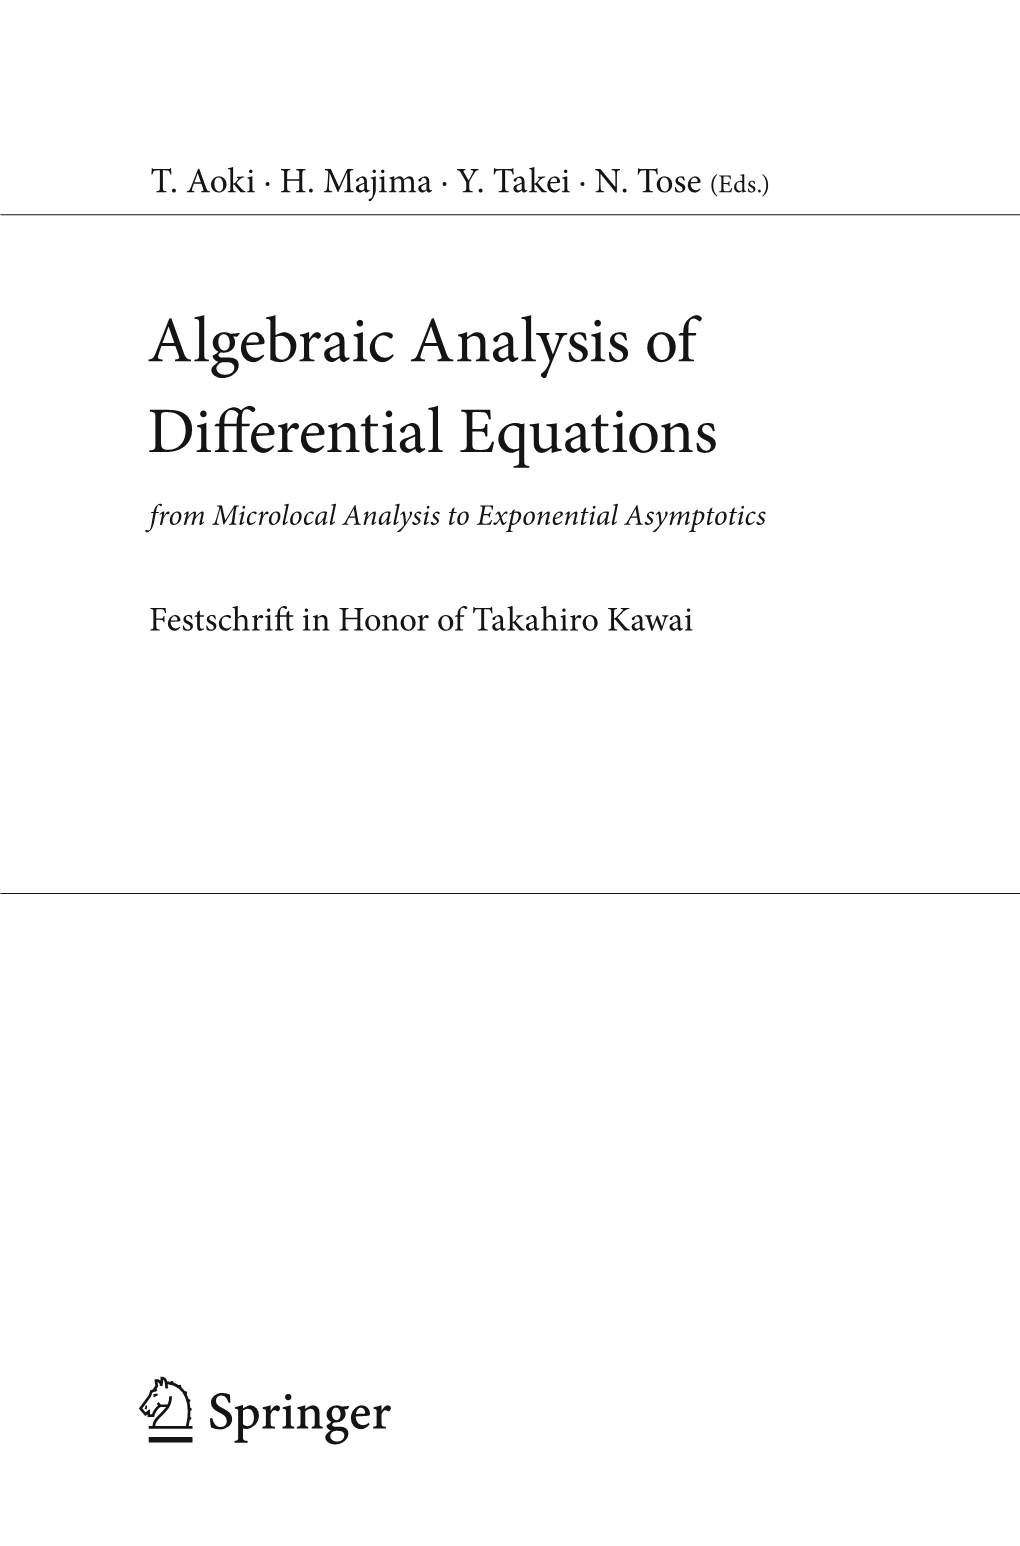 Algebraic Analysis of Differential Equations